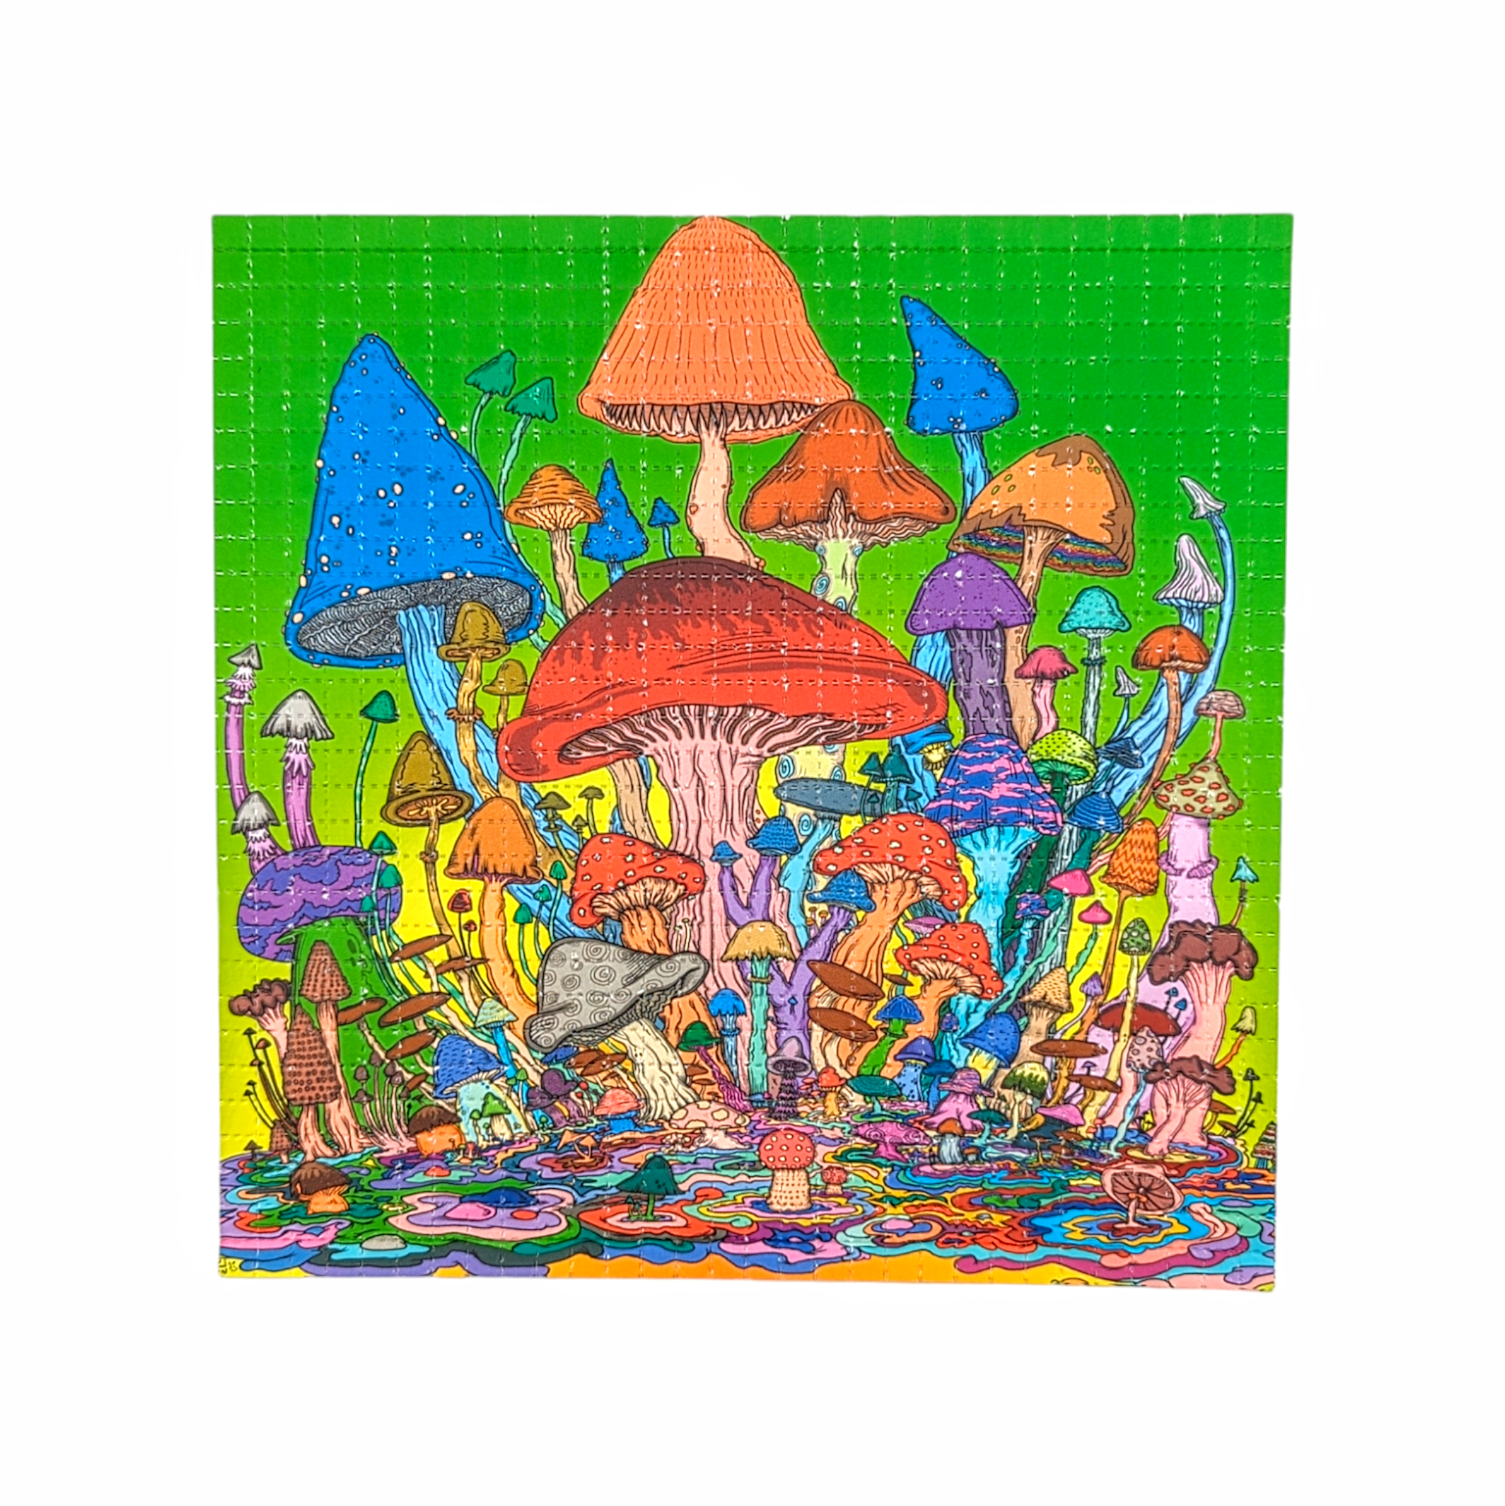 Vincent Gordon  Melty Mushrooms, 2024 Archival Pigment Print on Perforated Blotter Paper 7.75 x 7.75 in Edition of 100  Hand Signed + Numbered by the artist. Hand perforated by Zane Kesey.